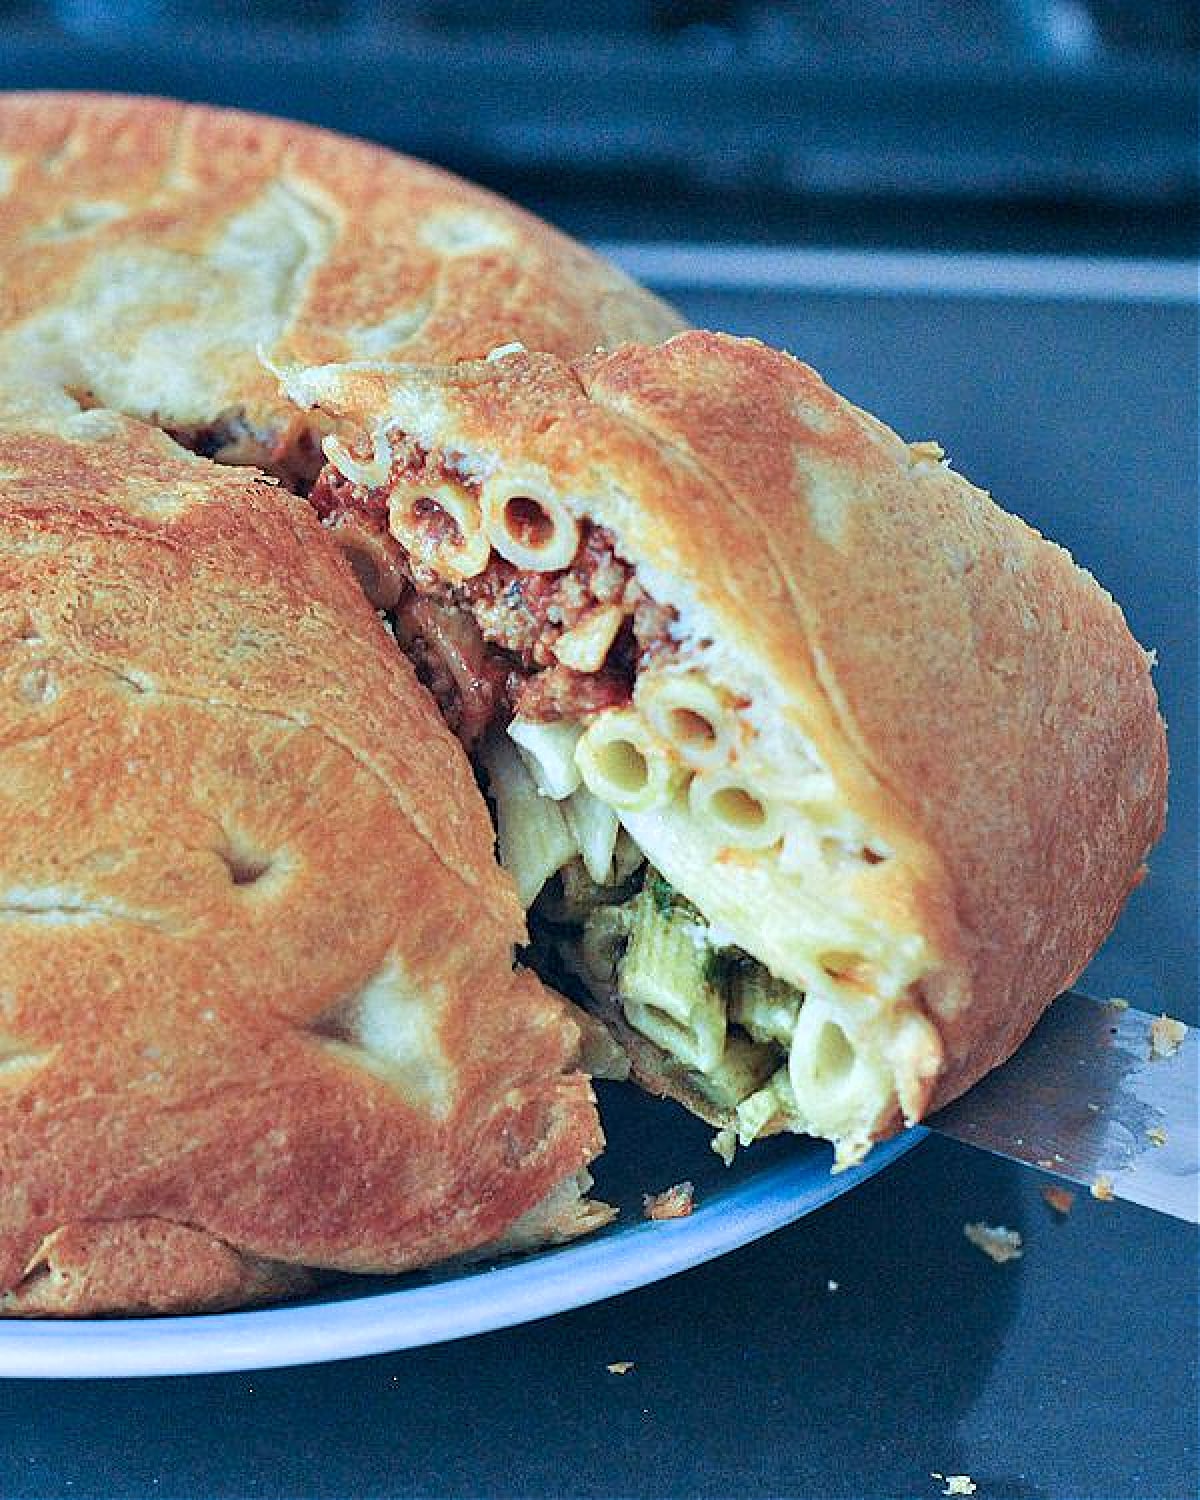 A single serving of timpano being cut and removed from a full timpano. Timpano is a large pastry dome filled with pasta: a red marinara layer of penne pasta on top, a middle layer of white Alfredo pasta, and a bottom layer of green pesto pasta.